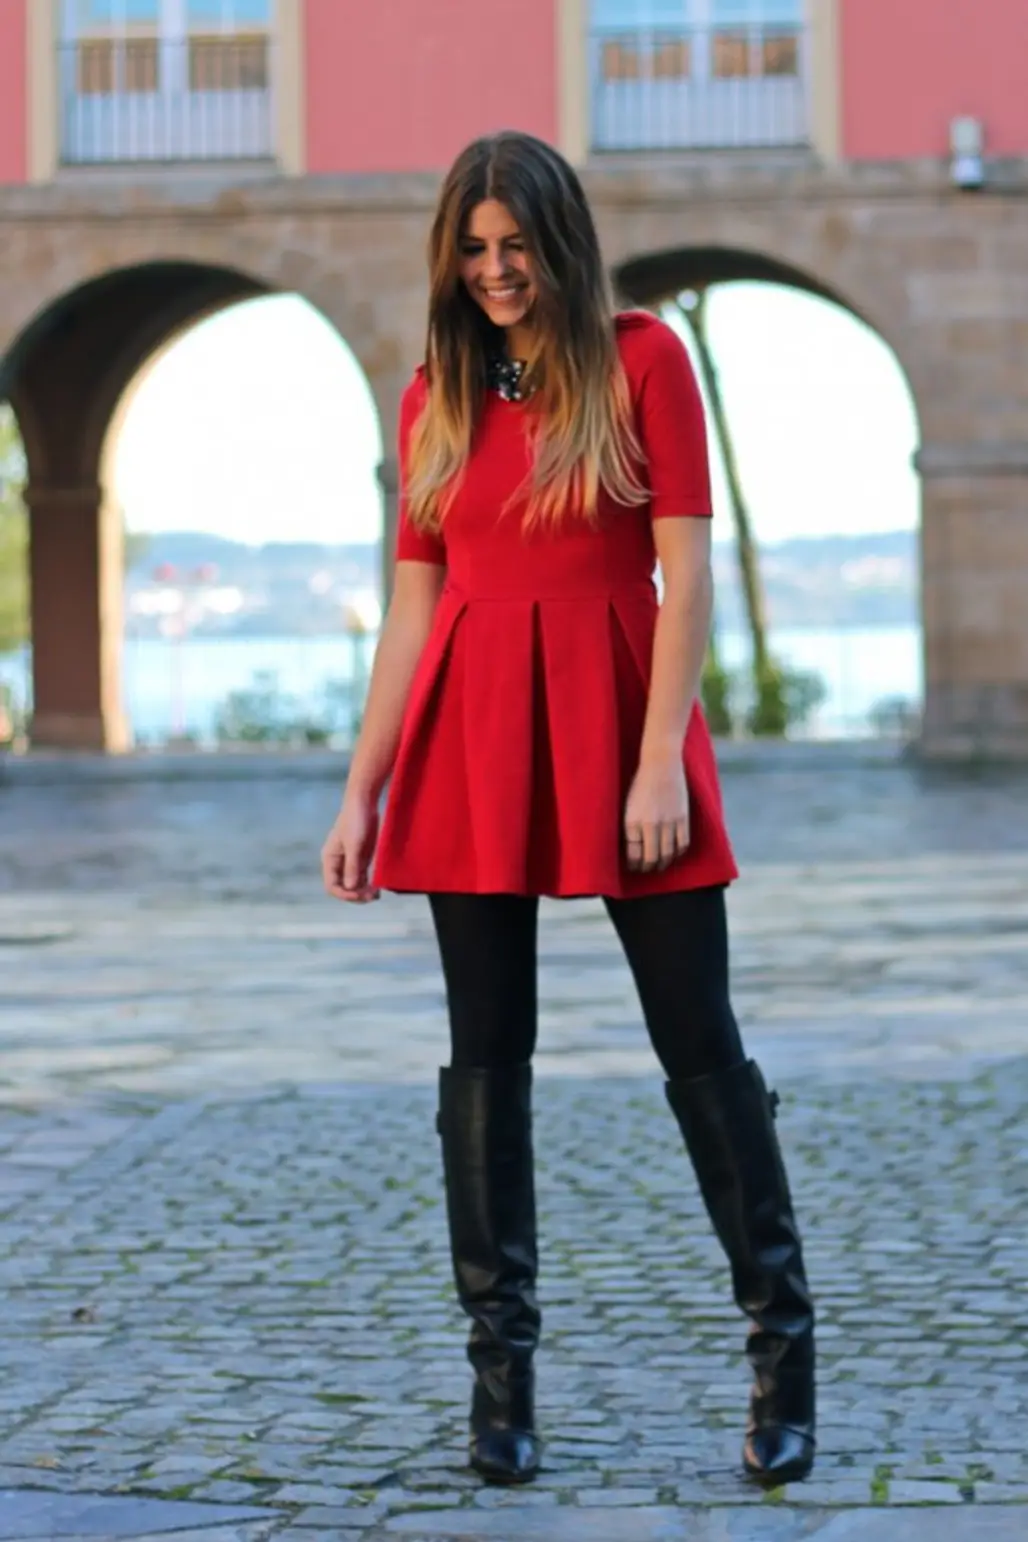 With Tights and a Red Dress